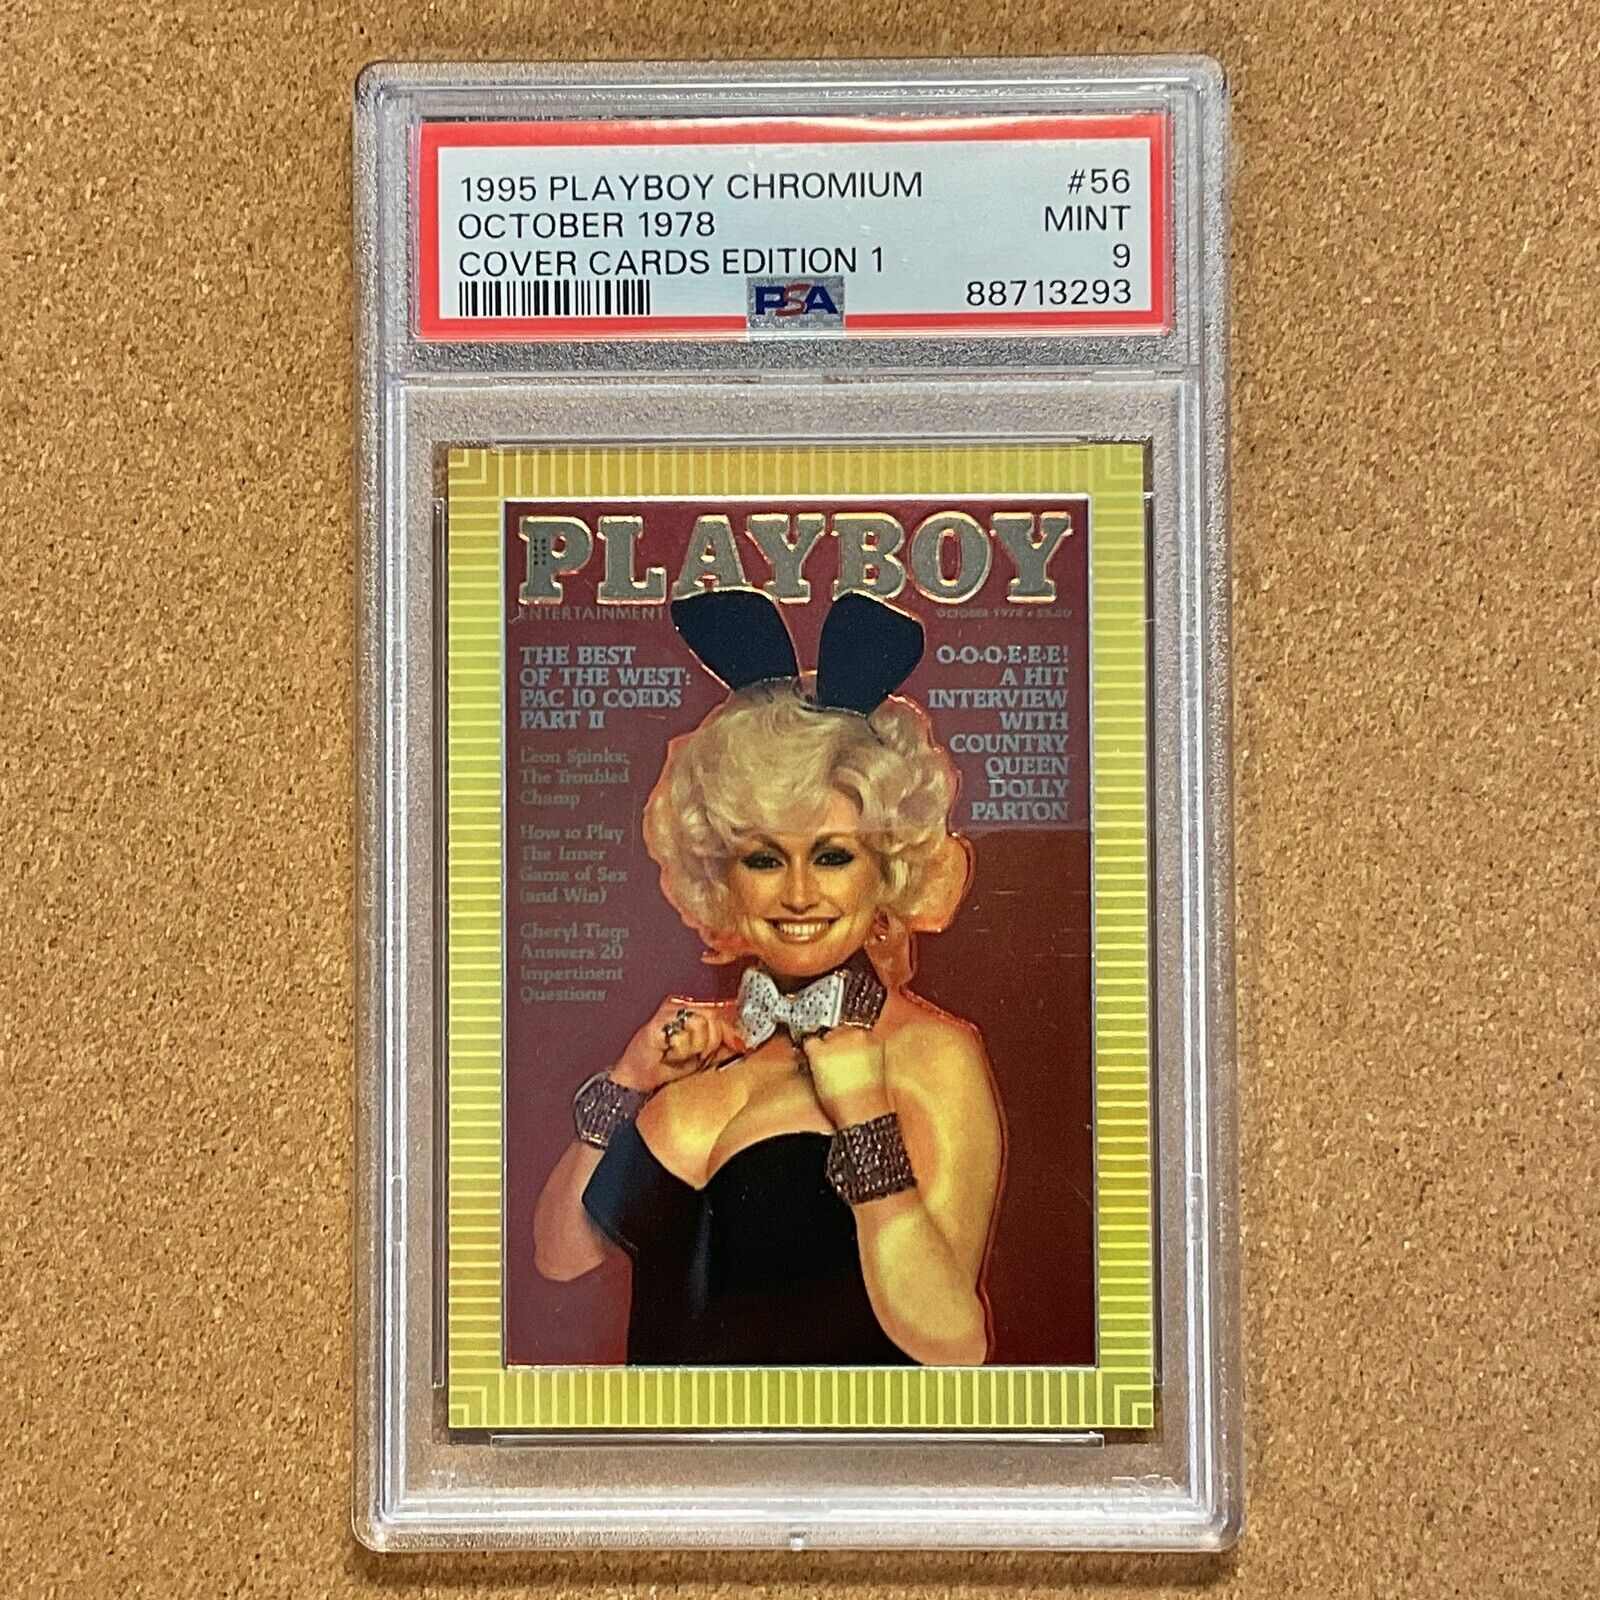 DOLLY PARTON - 1995 PLAYBOY CHROMIUM COVERS CARDS OCT 1978 #56 ROOKIE PSA 9 MINT